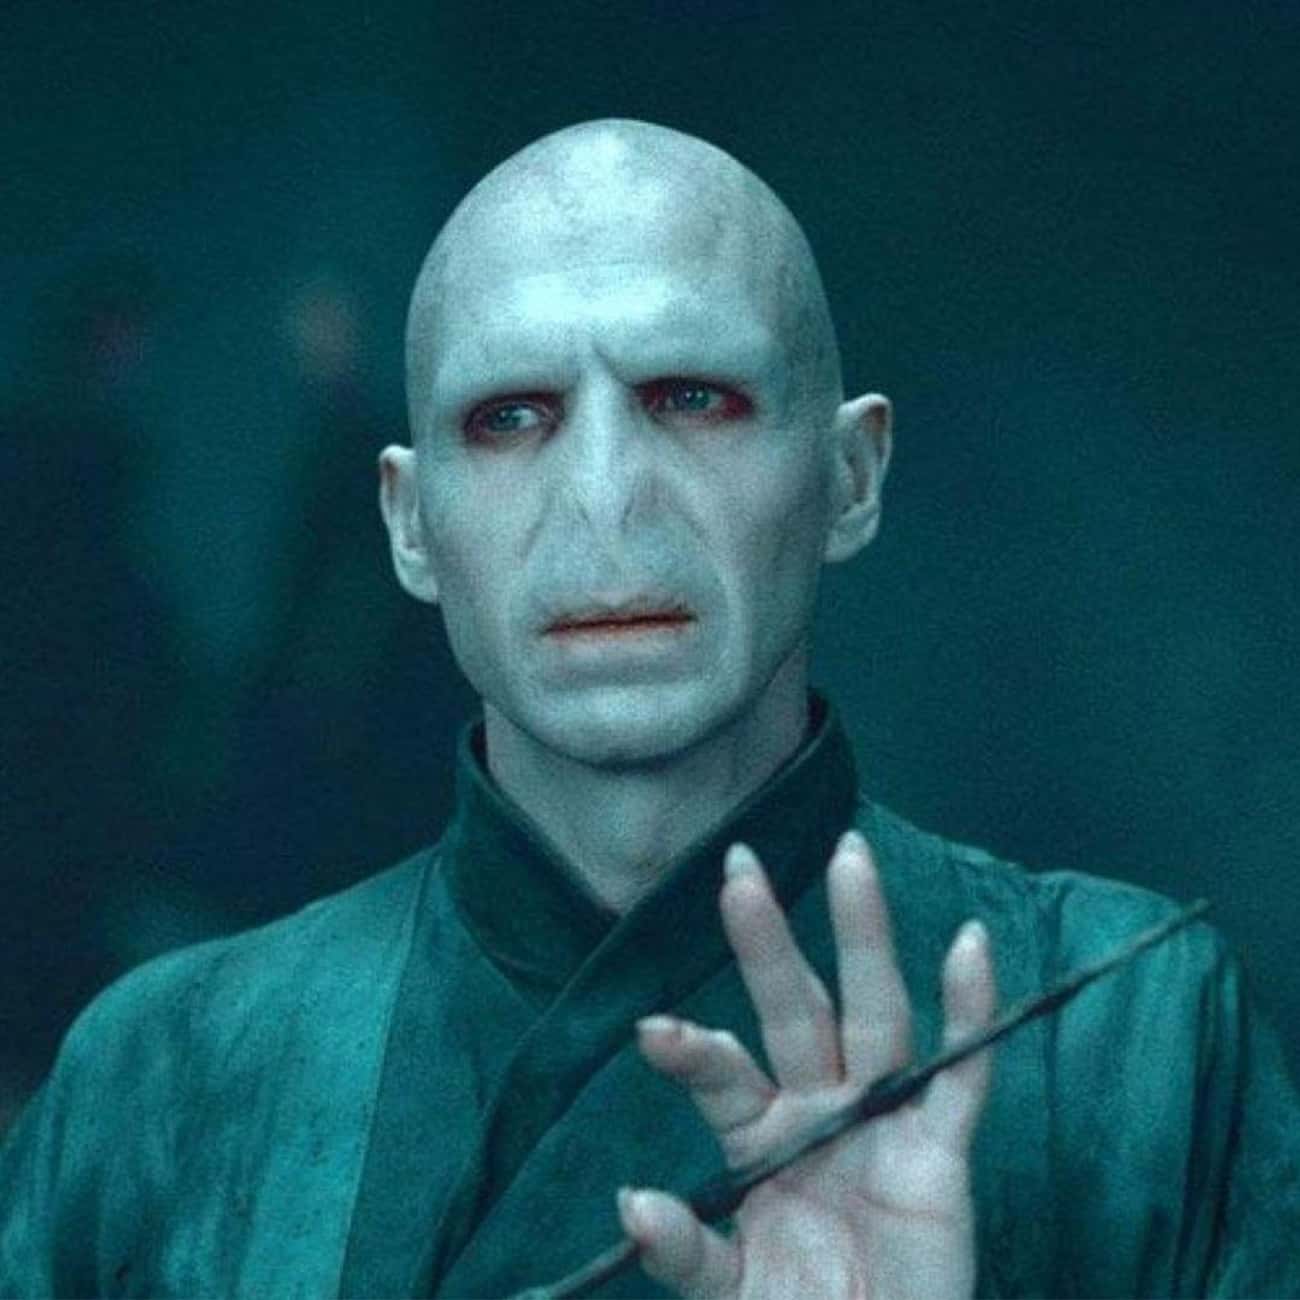 Voldemort In The Movies: Snake Human